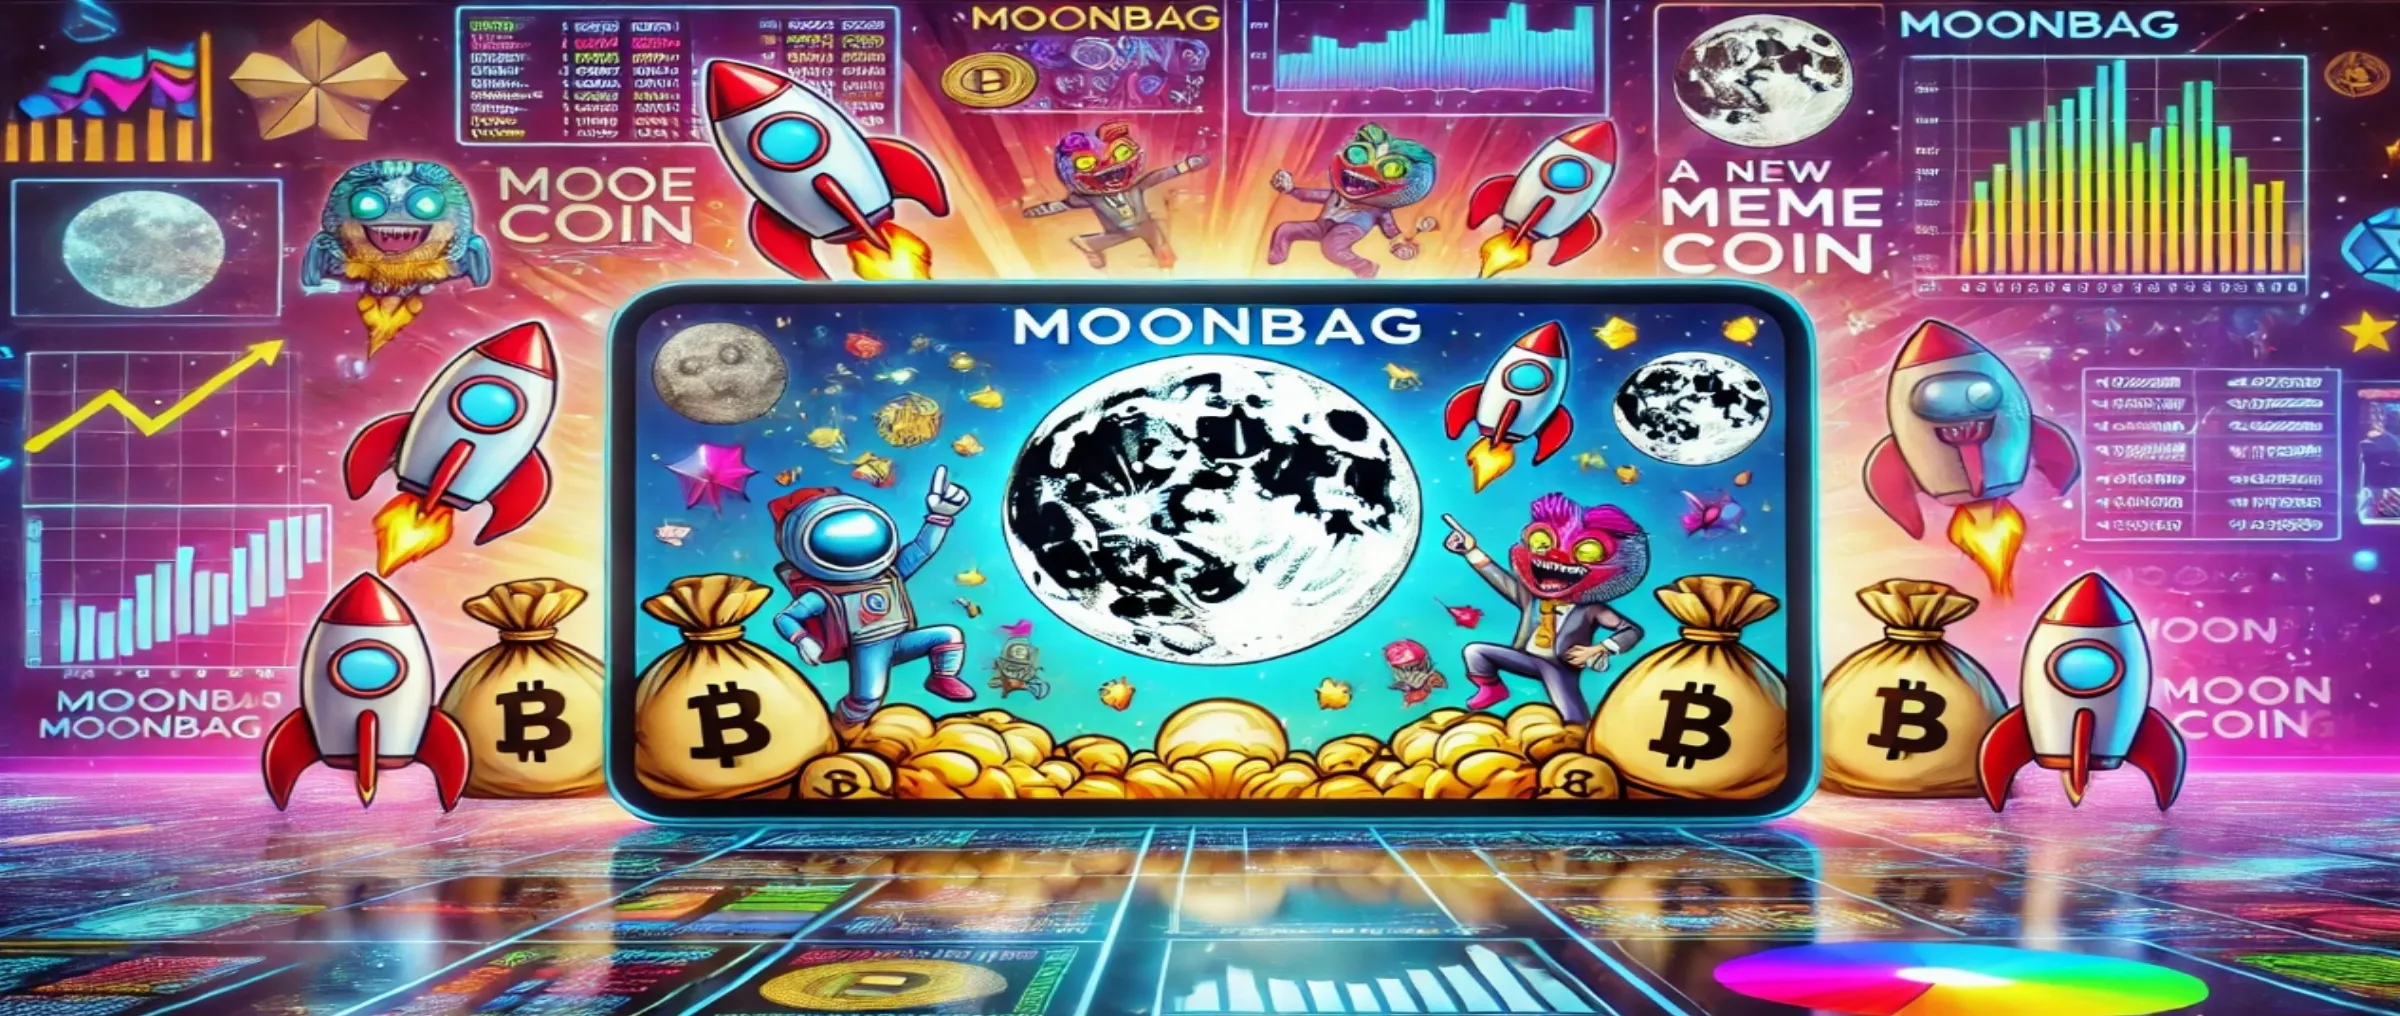 MoonBag Crypto Impact and Disruption on Established Tokens